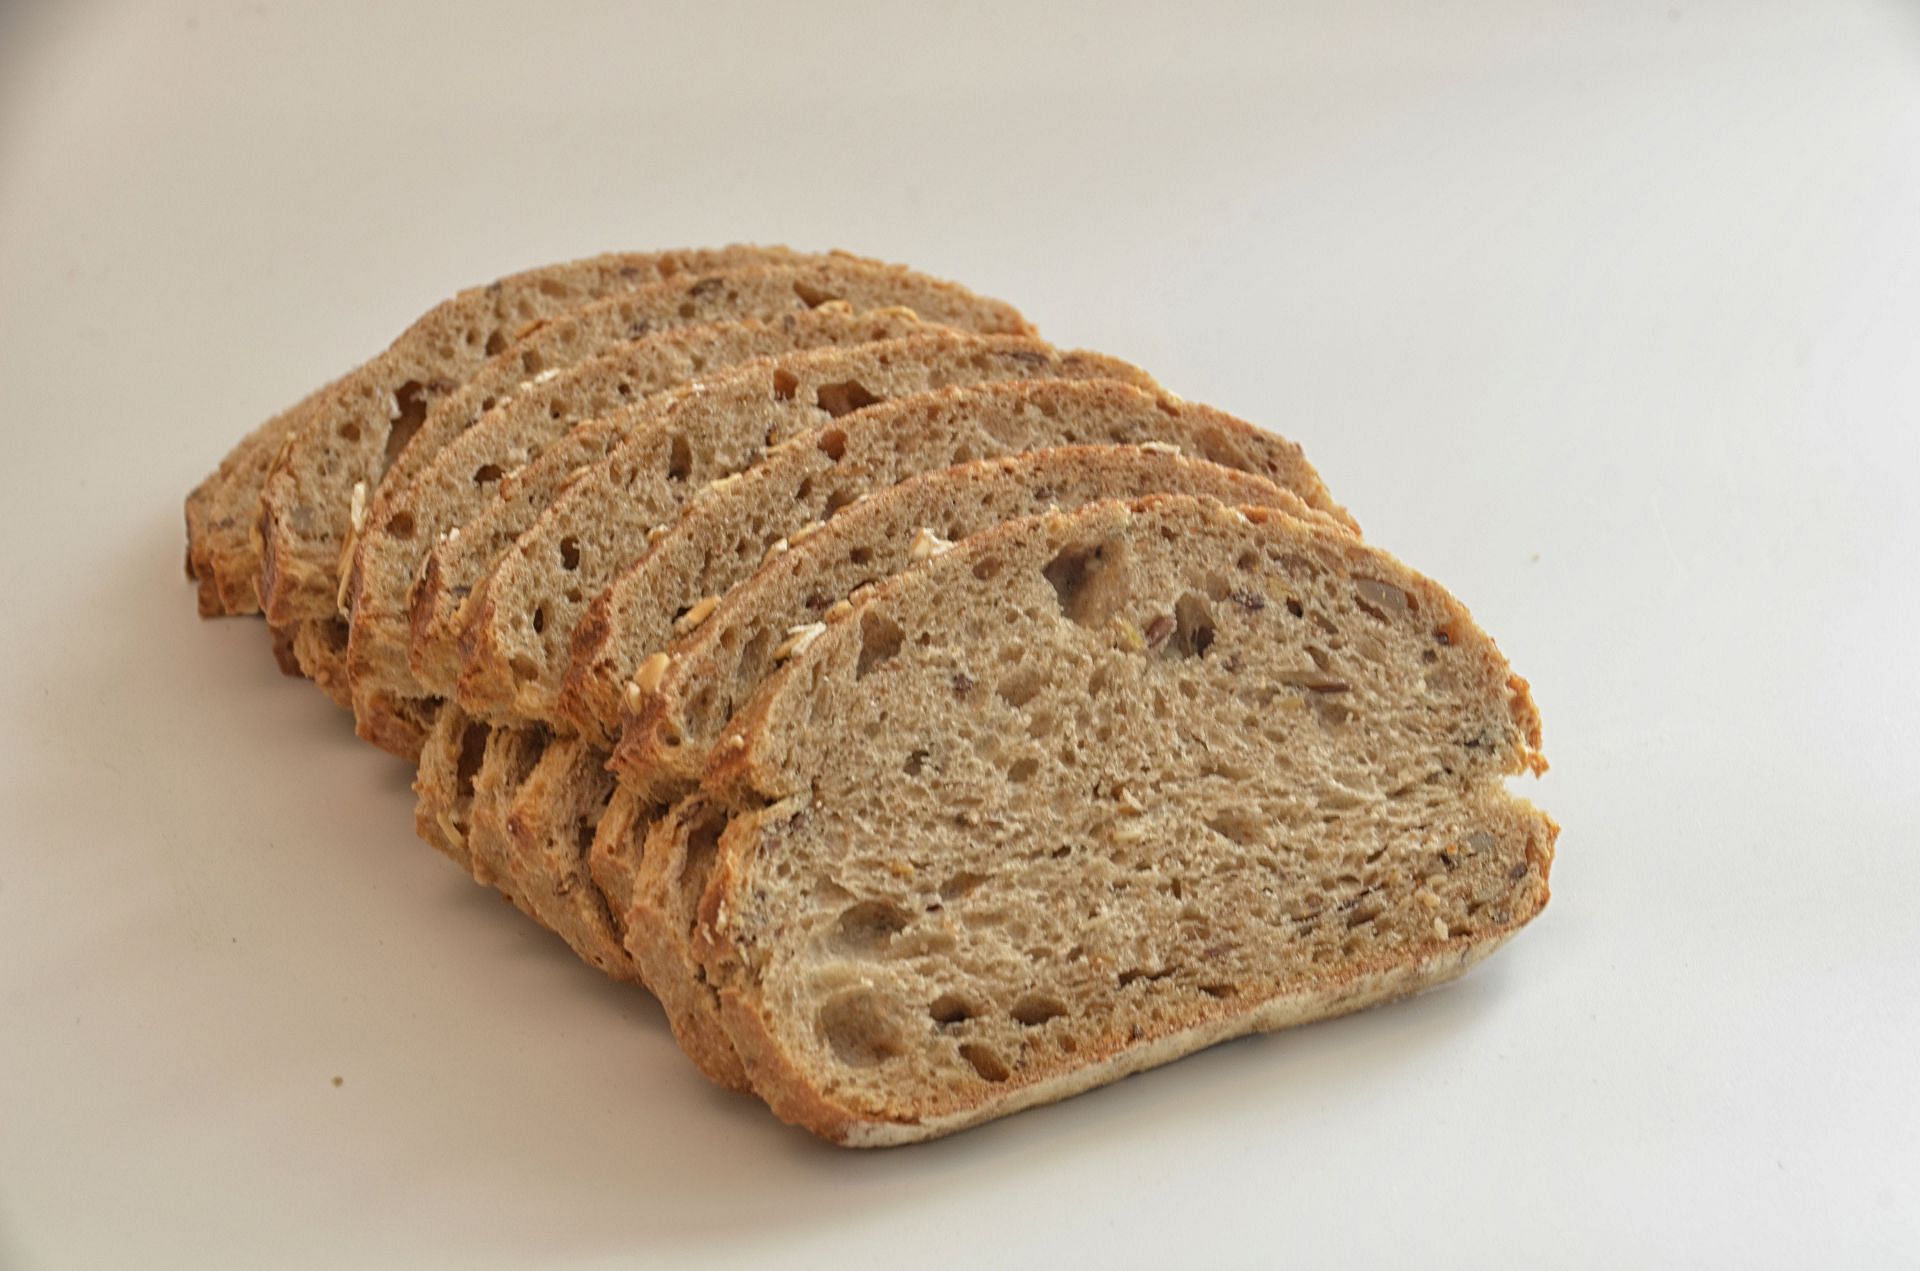 Importance of low carb bread (image sourced via Pexels / Photo by hermaion)